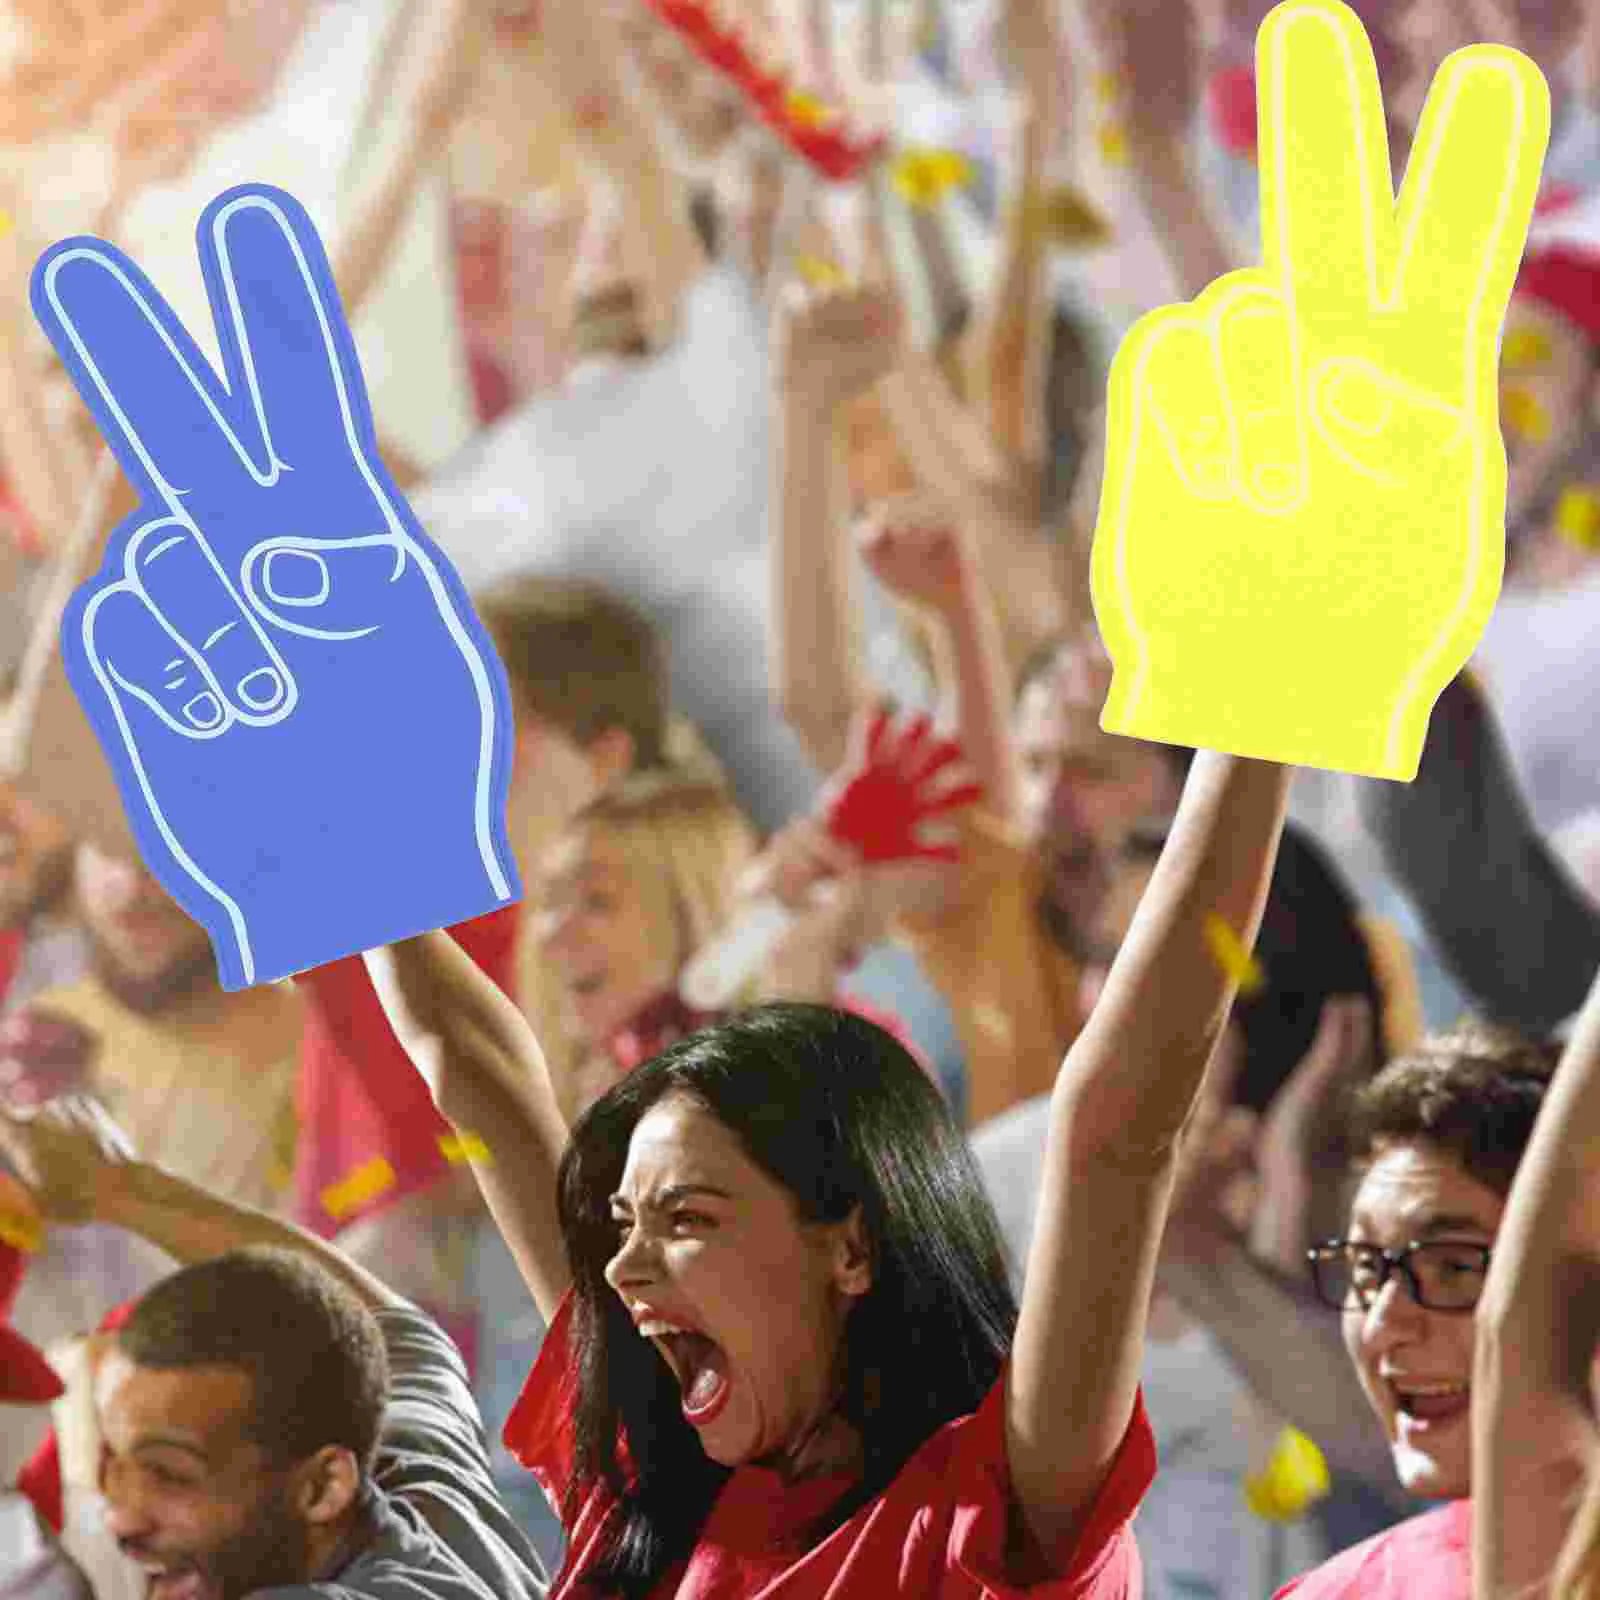 

6Pcs Sports Cheering Foam Hands Football Party Favors Novelty Foam Fingers Sports Event Cheer Props